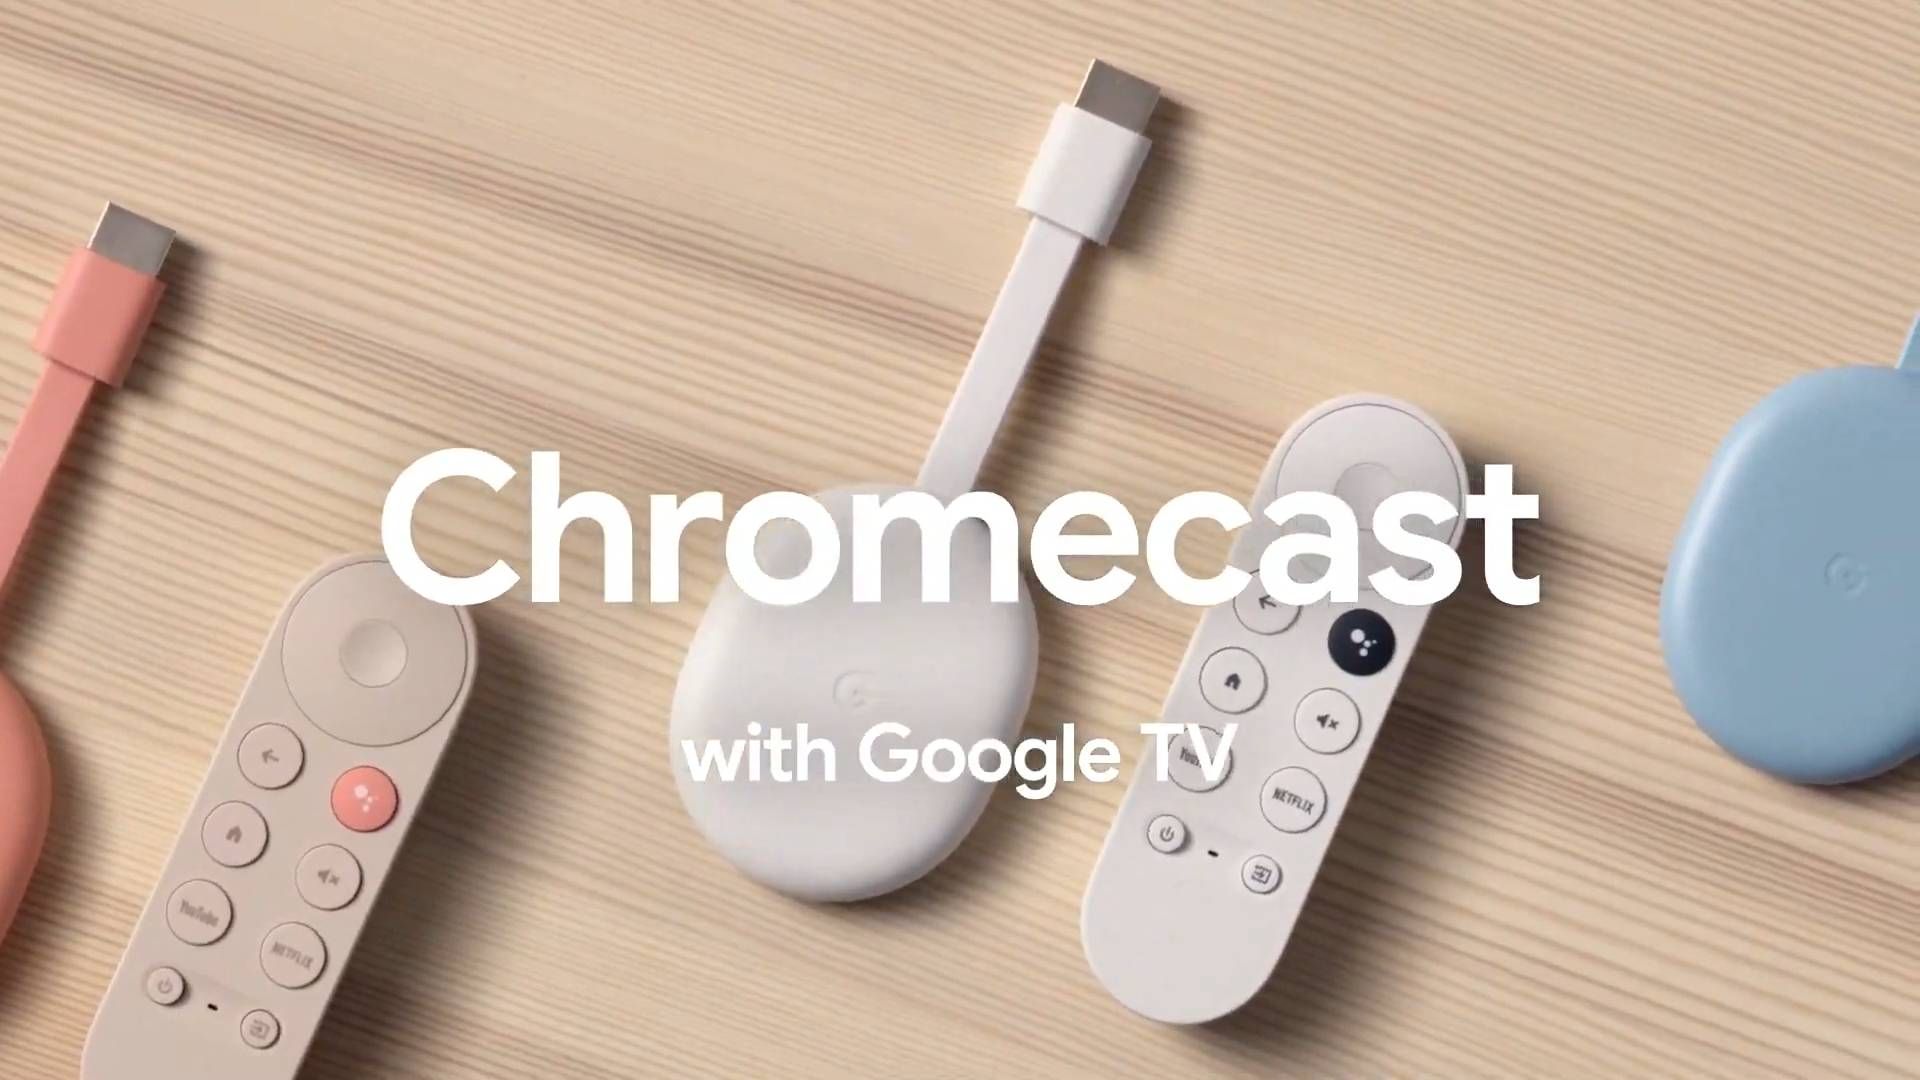 Brobrygge Oprigtighed Høre fra Chromecast with Google TV requires an outlet for power, can't run on your  TV's USB alone